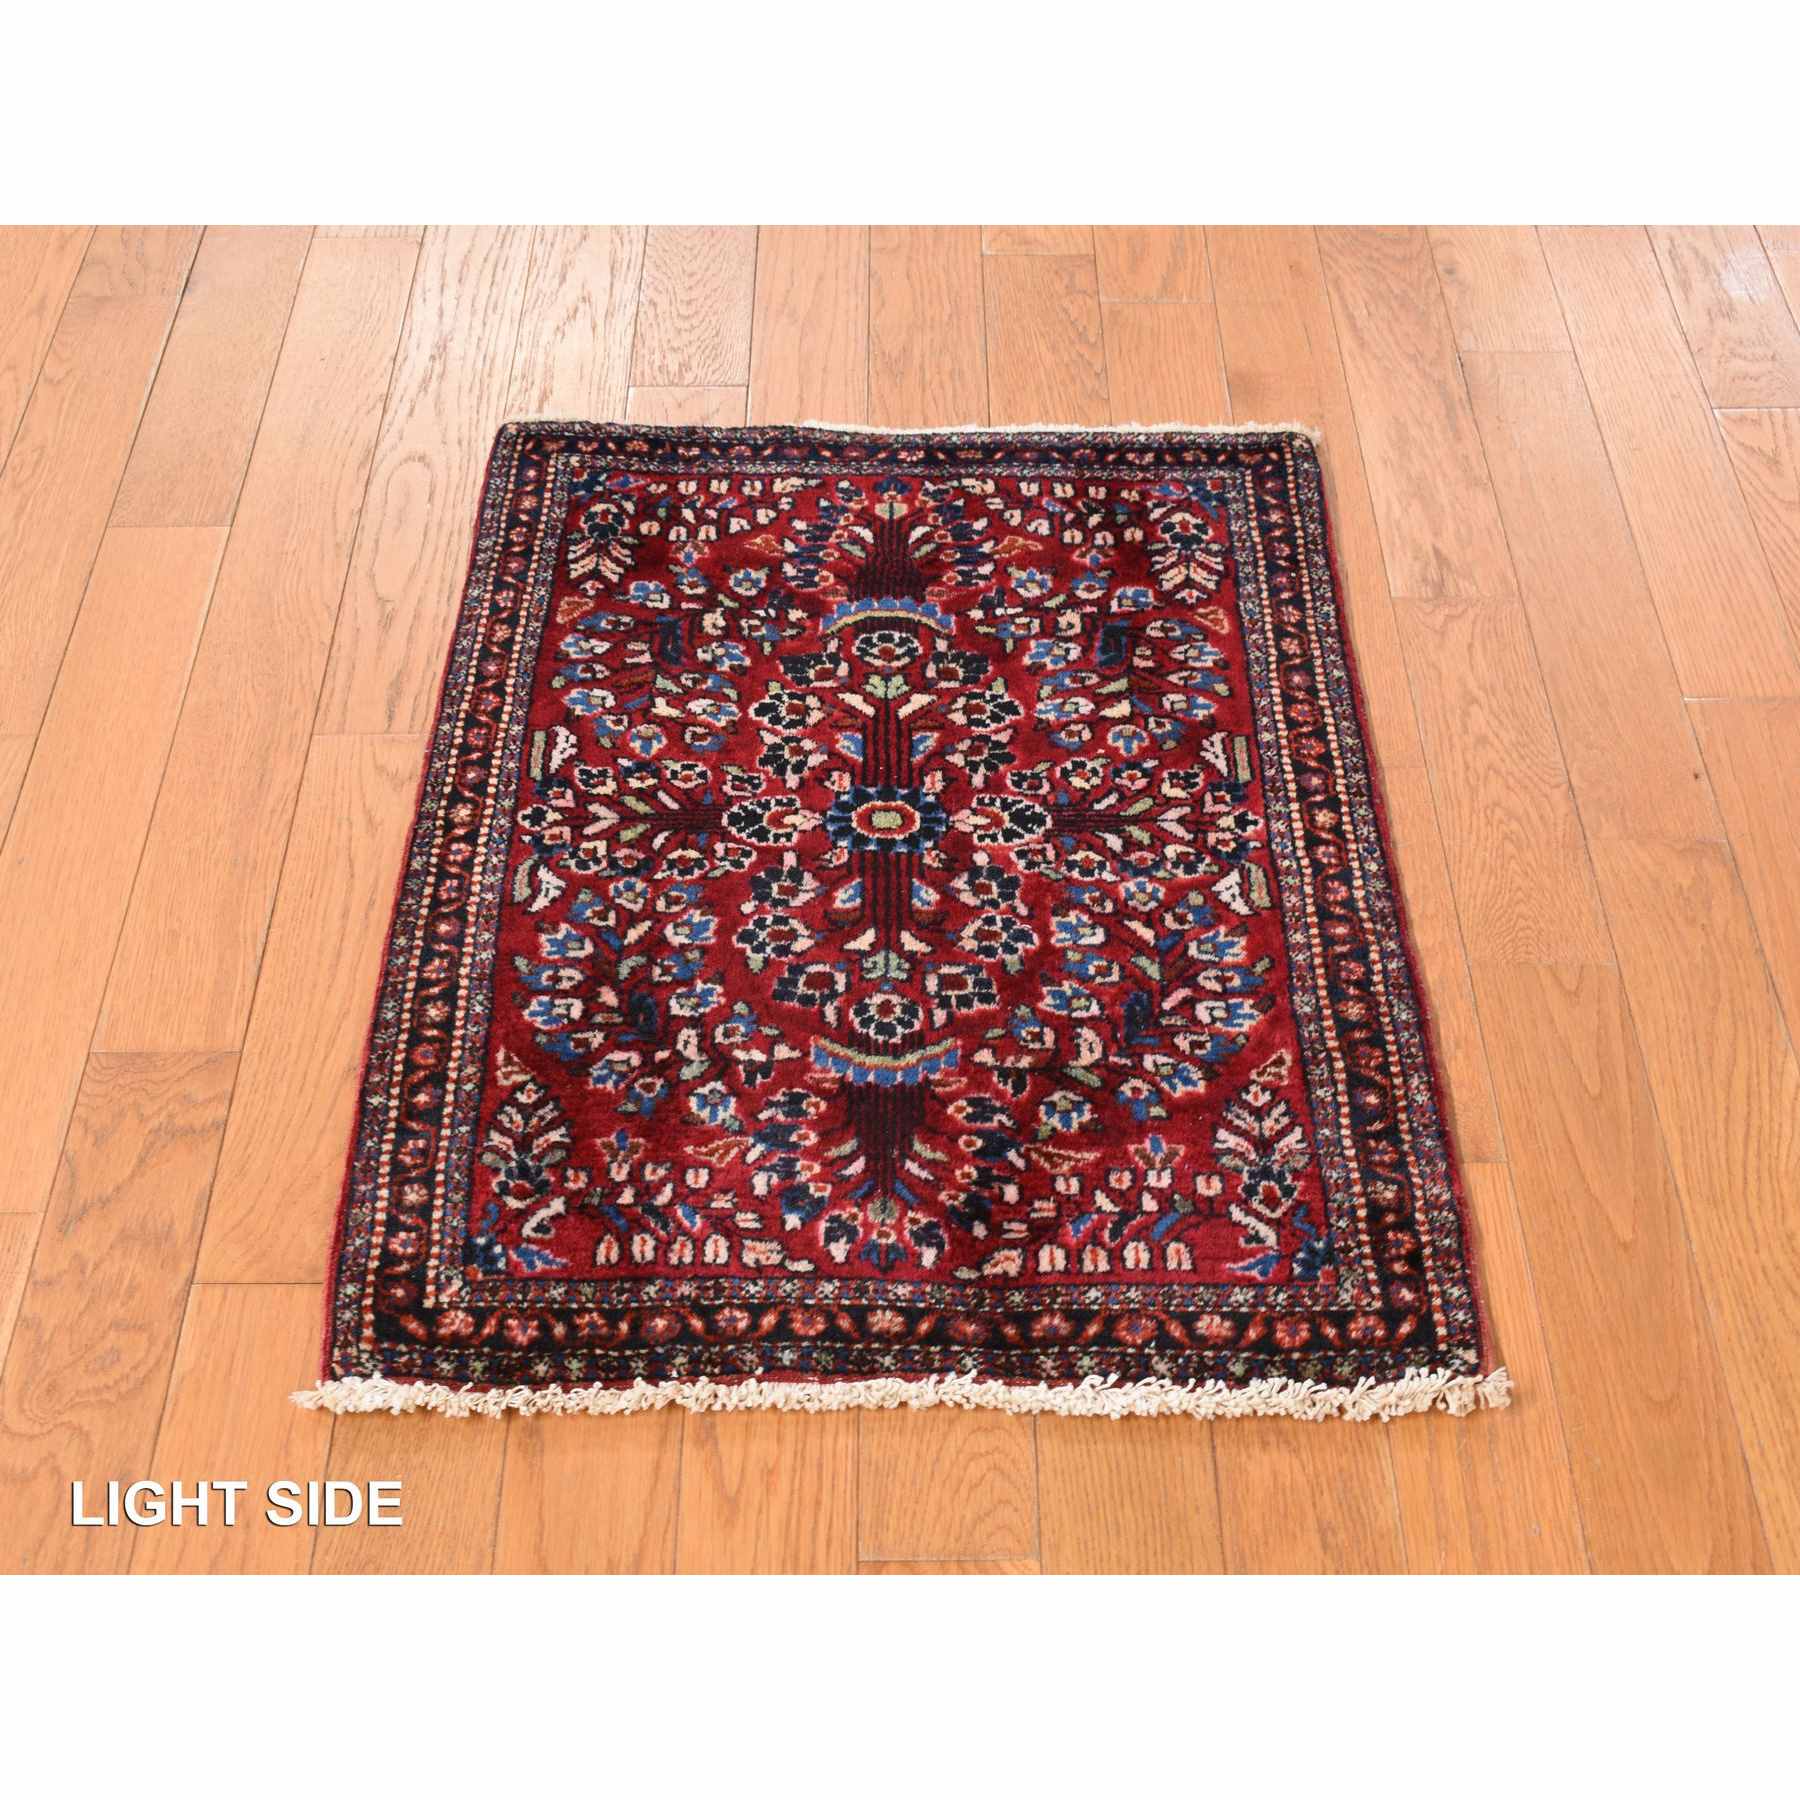 Antique-Hand-Knotted-Rug-390940